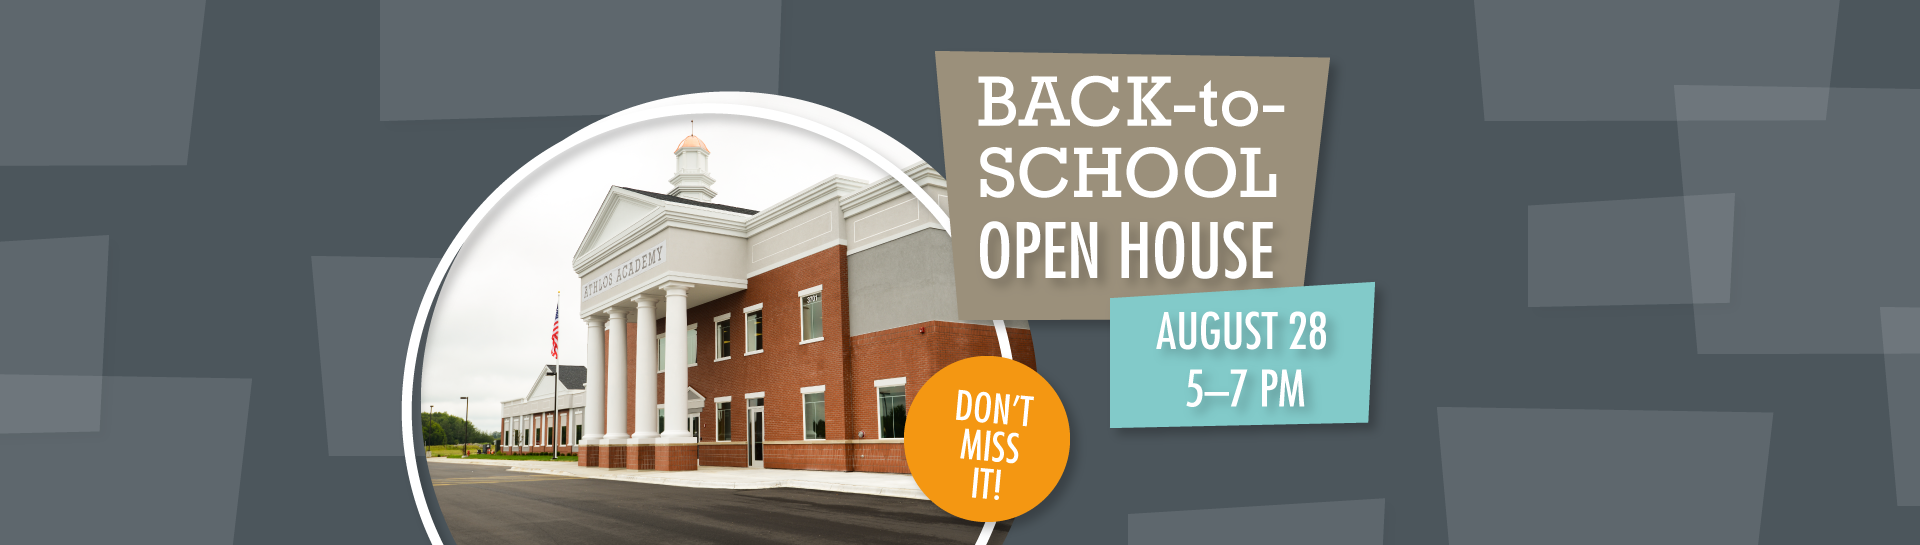 Back-to-School Open House - August 28, 5–7 pm